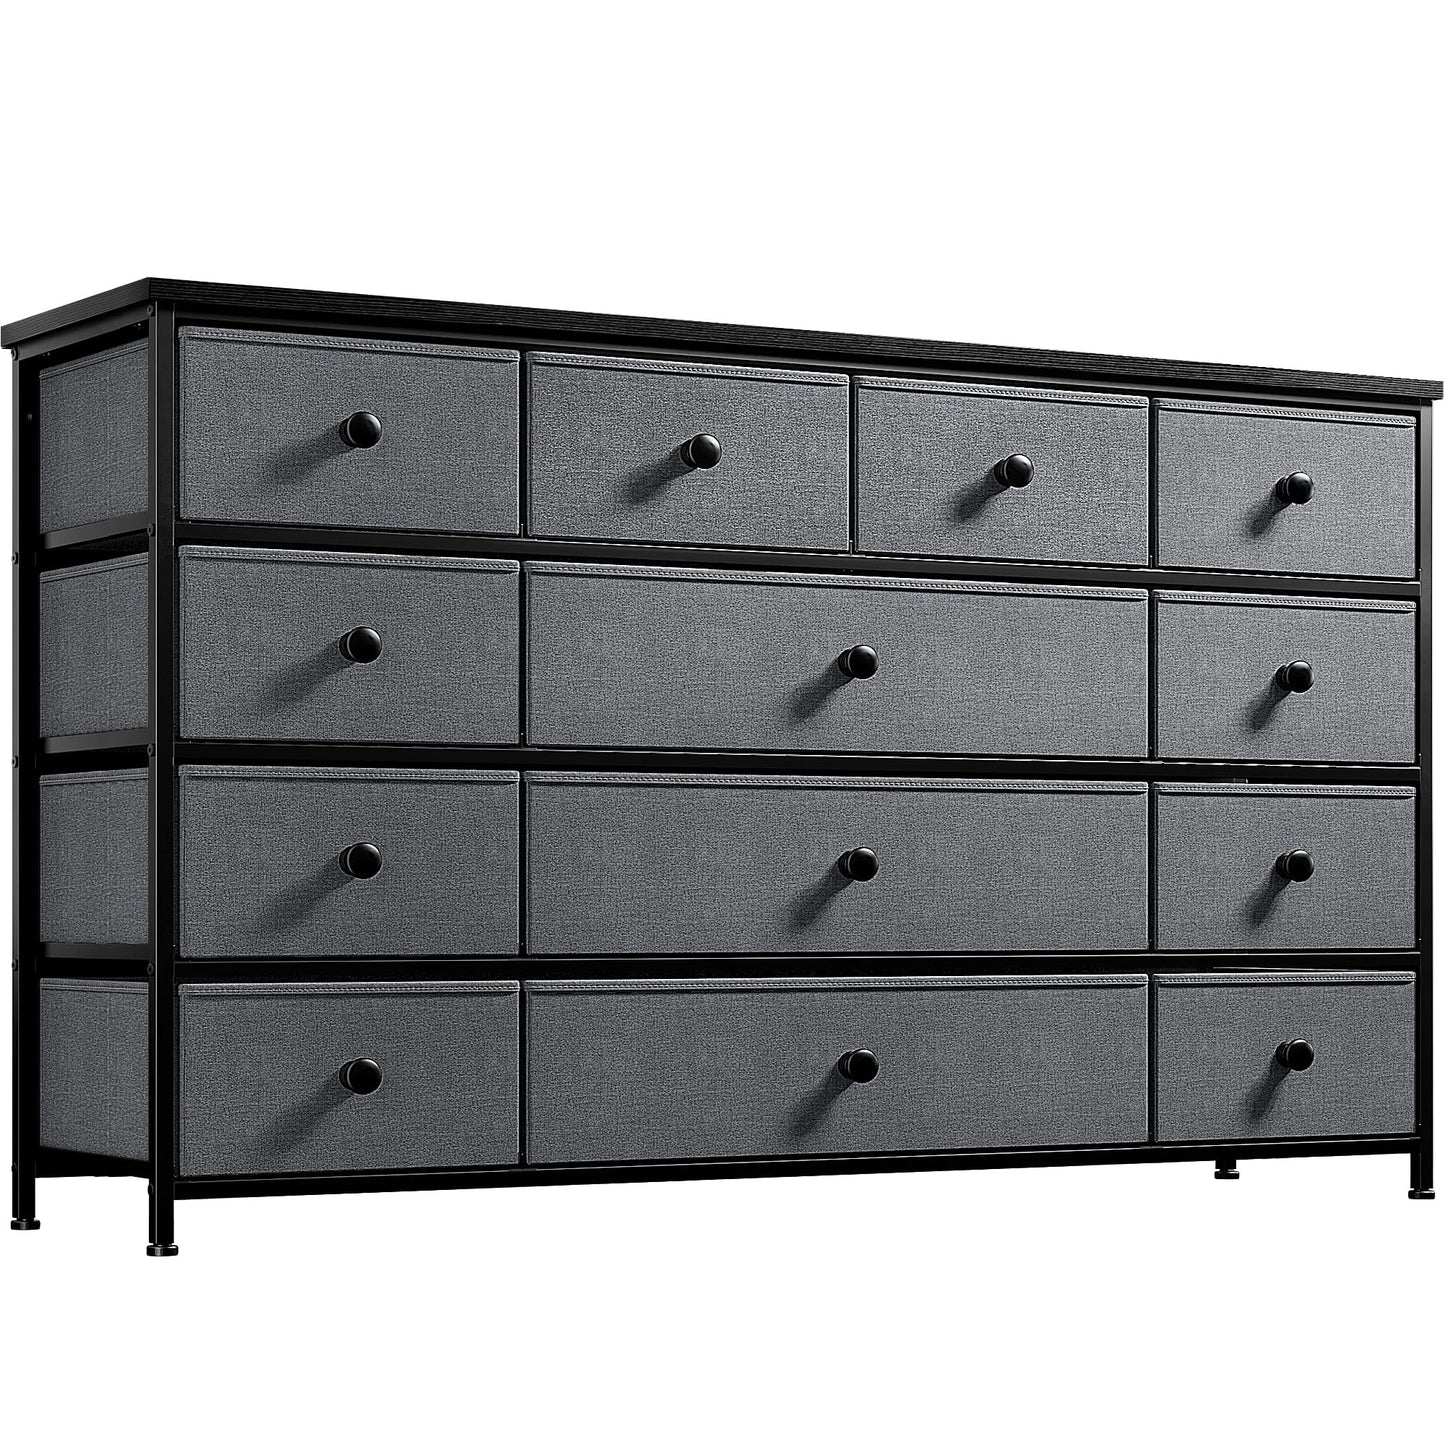 Hana Exports Dresser TV Stand for 55" TV with 13 Drawers, Wide Dresser for Bedroom, Large Dressers & Chest of Drawers for Bedroom Living Room Entryway, Sturdy Metal Frame, 39.4"Wx 31.5"H x 11.8"D,Dark Gray